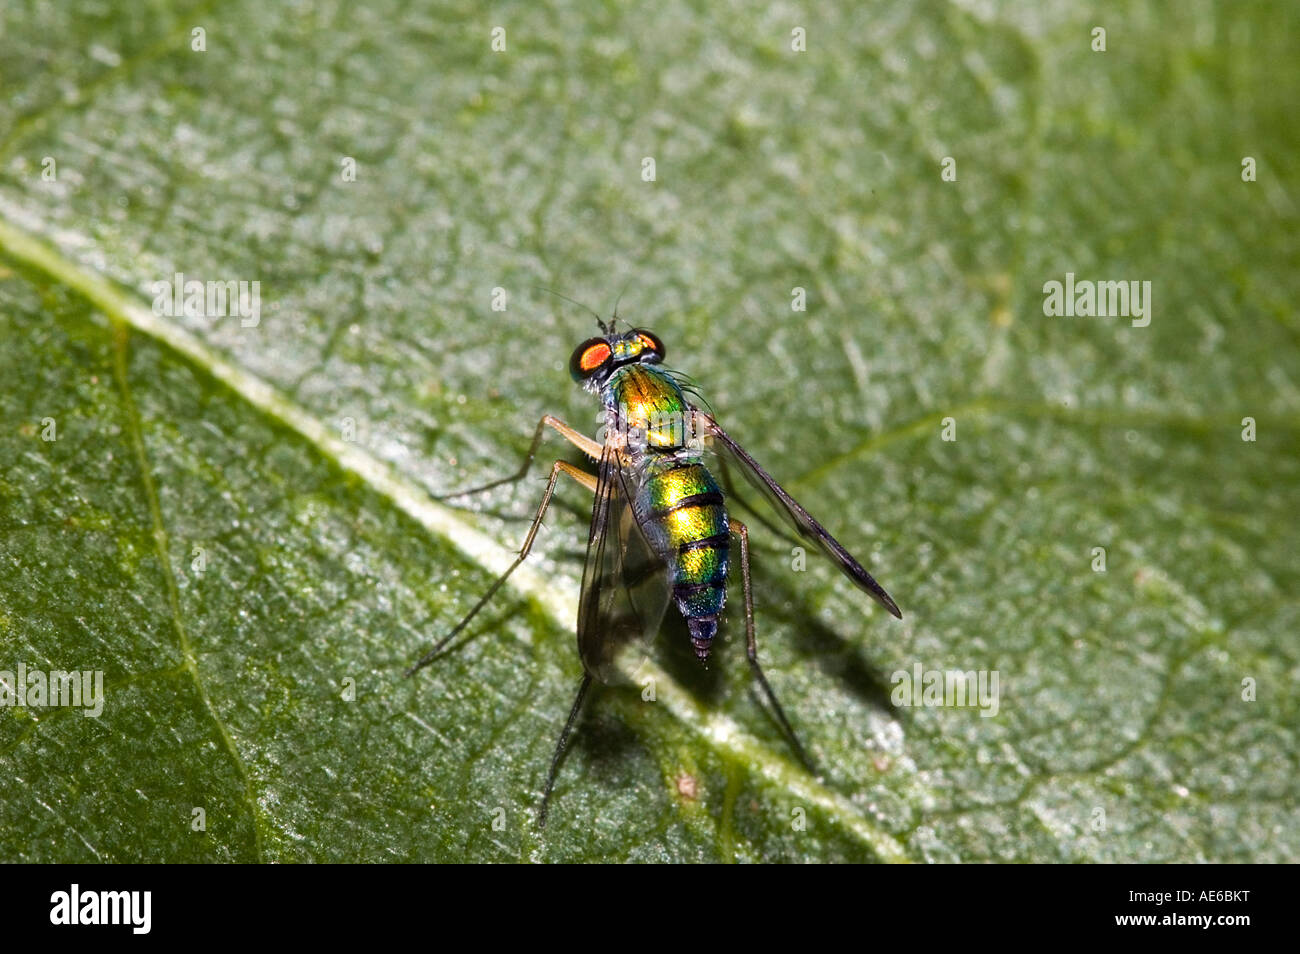 Tiny iridescent fly on a leaf Stock Photo